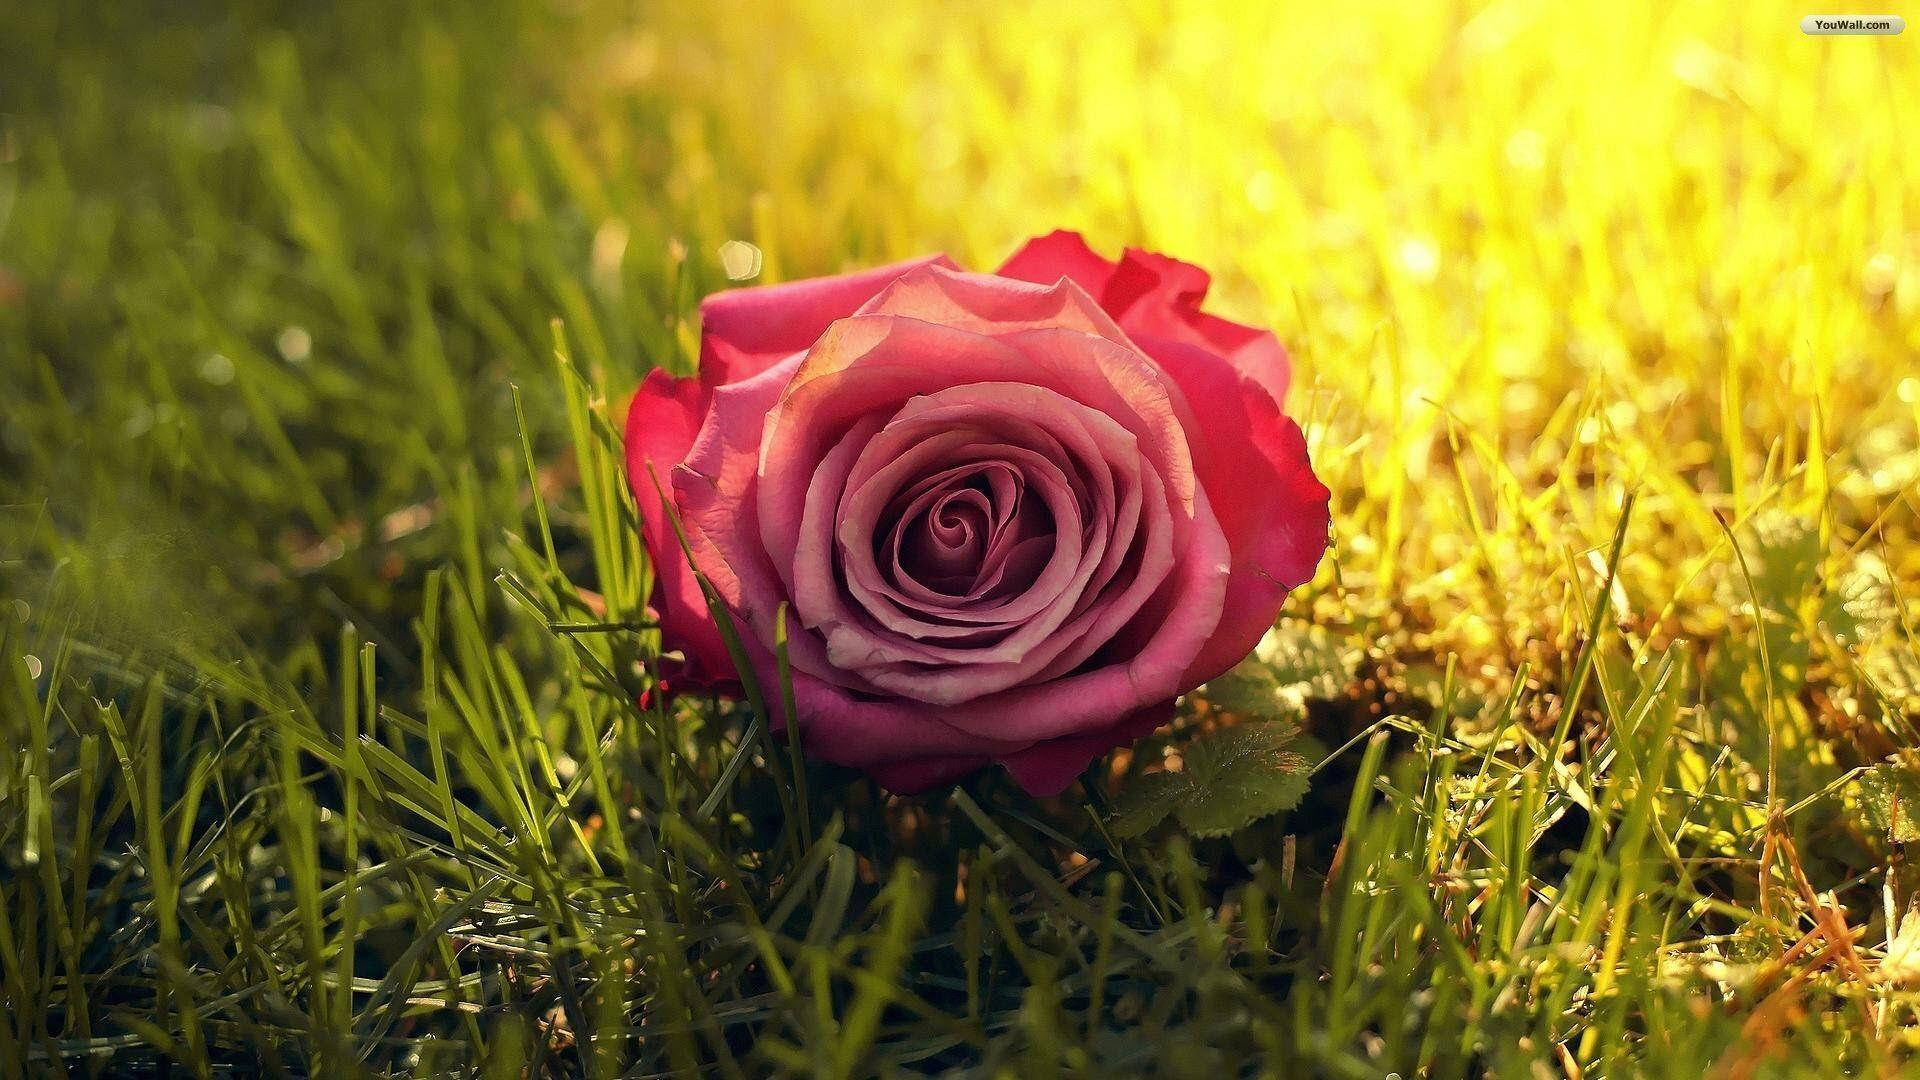 A Pink Rose From A Garden Of Roses Wallpaper